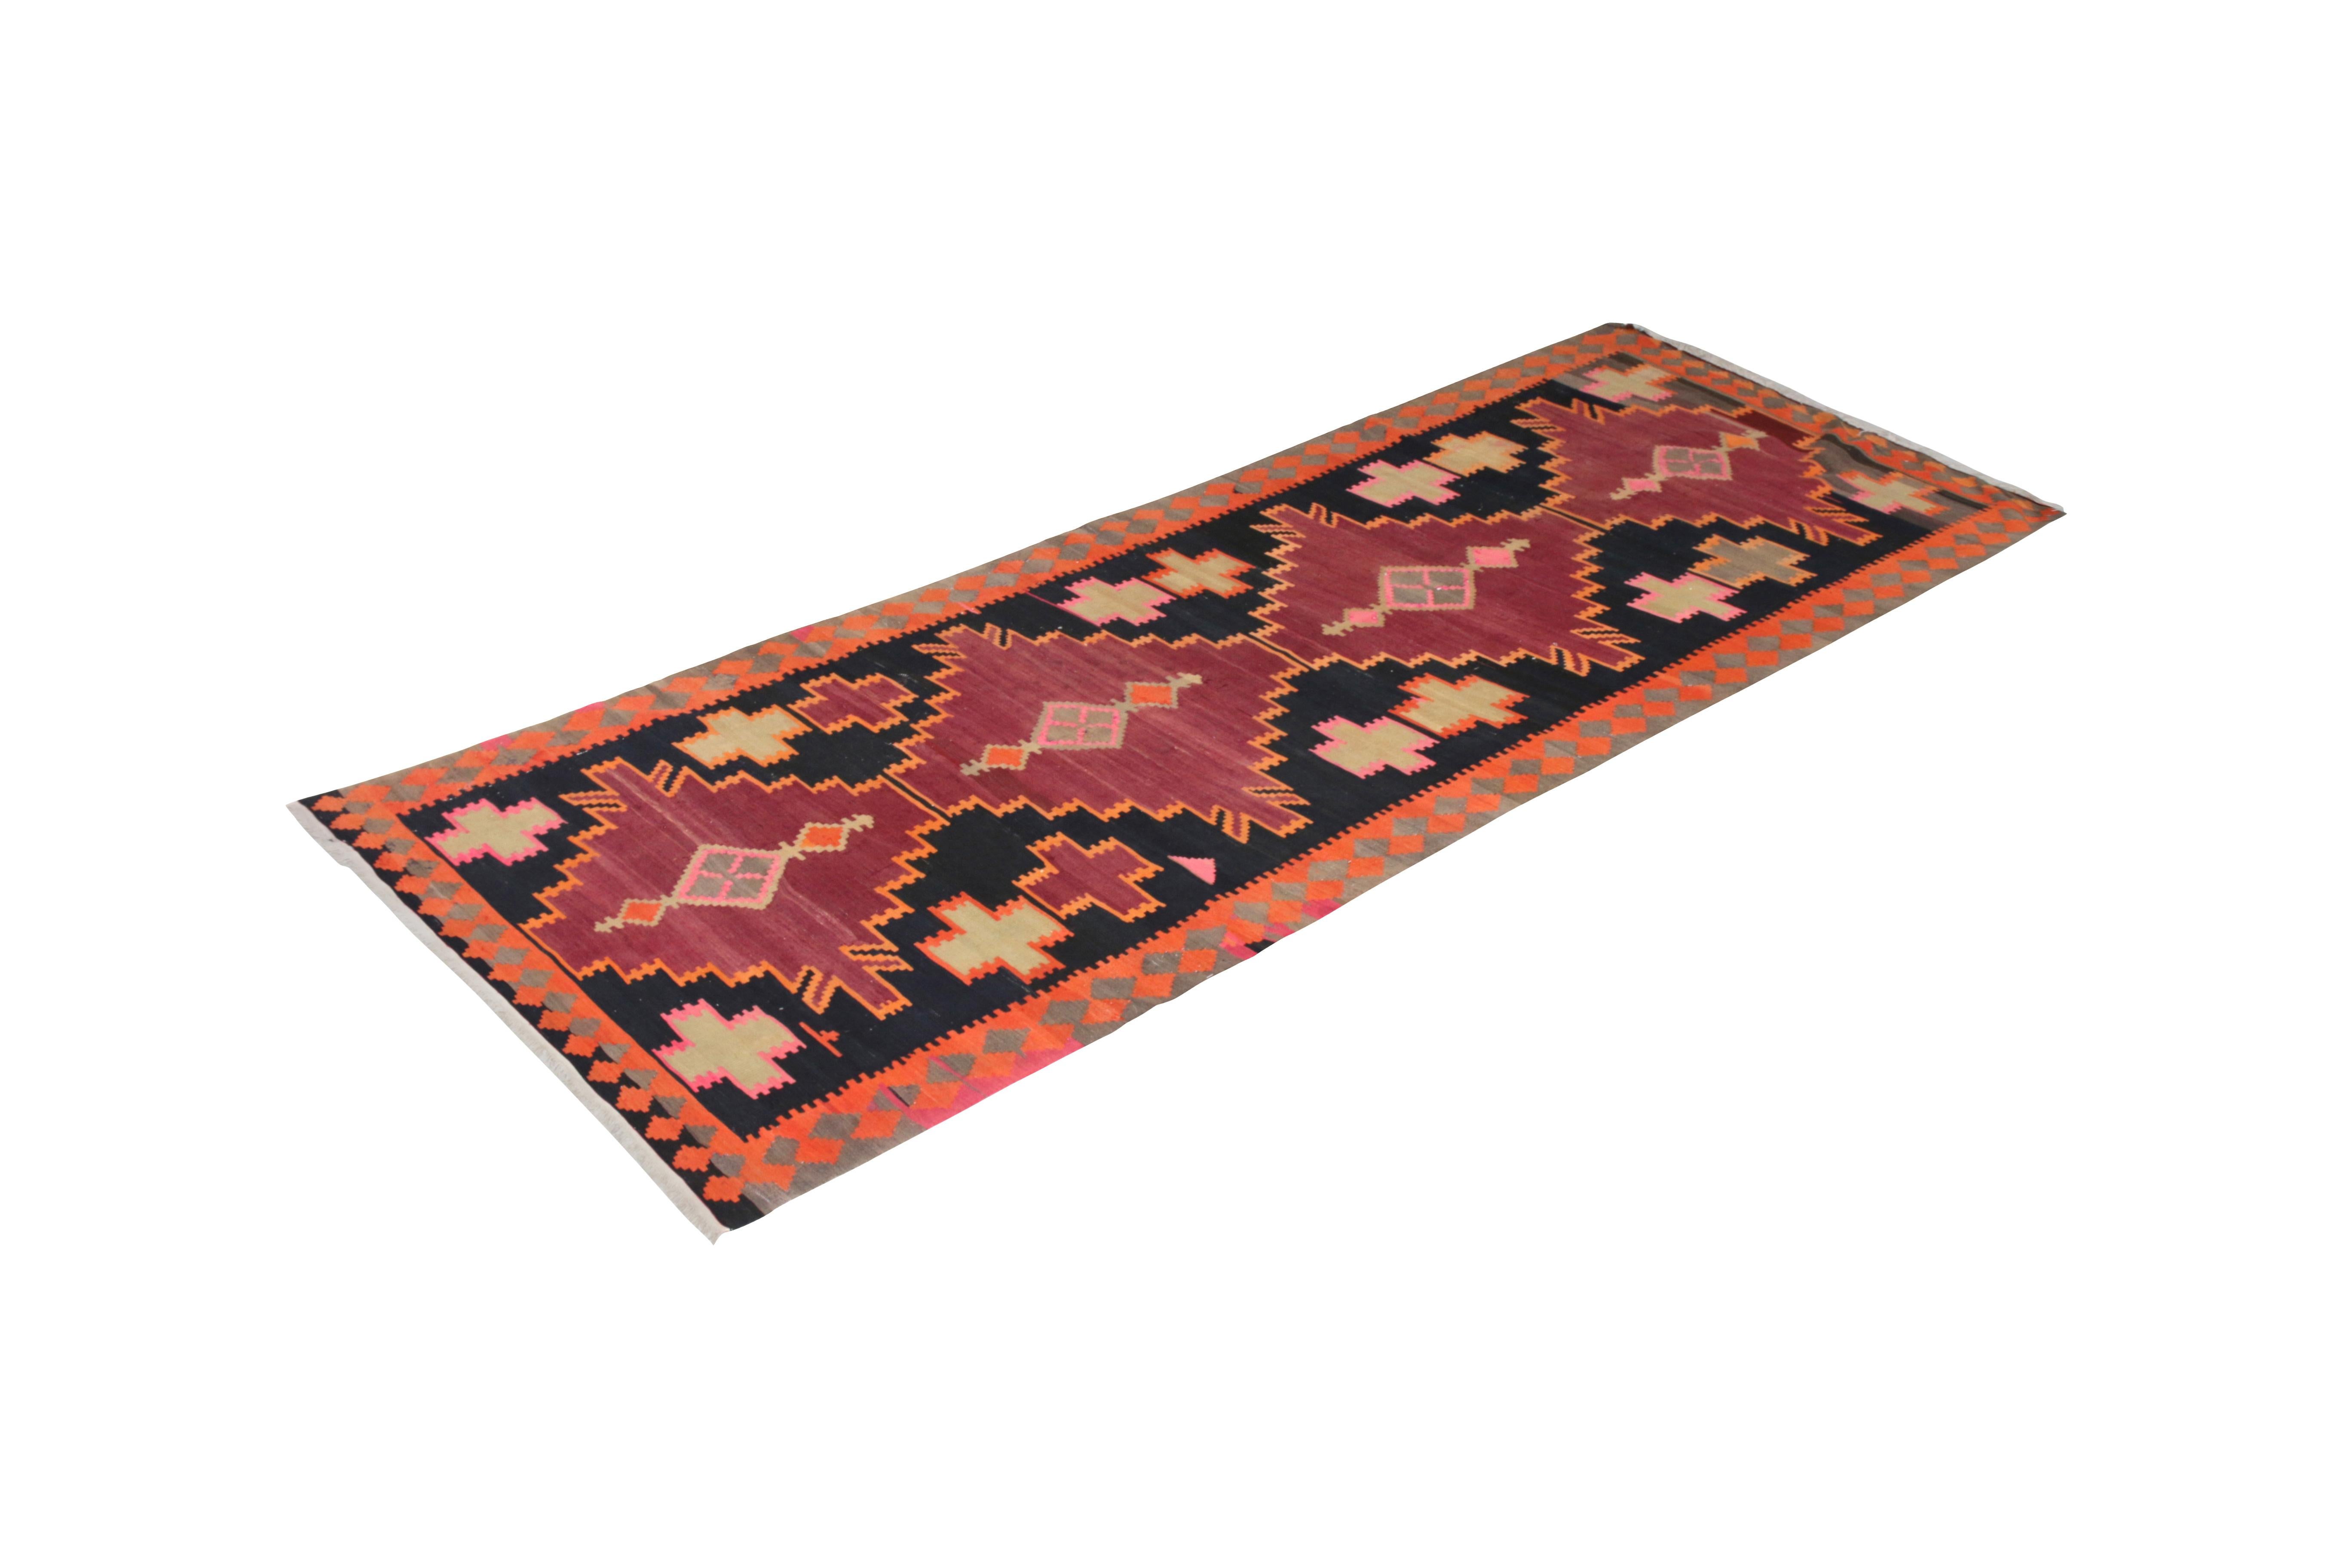 Handwoven in a wool flat-weave originating circa 1910-1920, this antique Kilim rug connotes a Northwest Persian Kilim design, one of our principal’s personal favorite selections from our collection with a rare wine burgundy colorway. Set against a